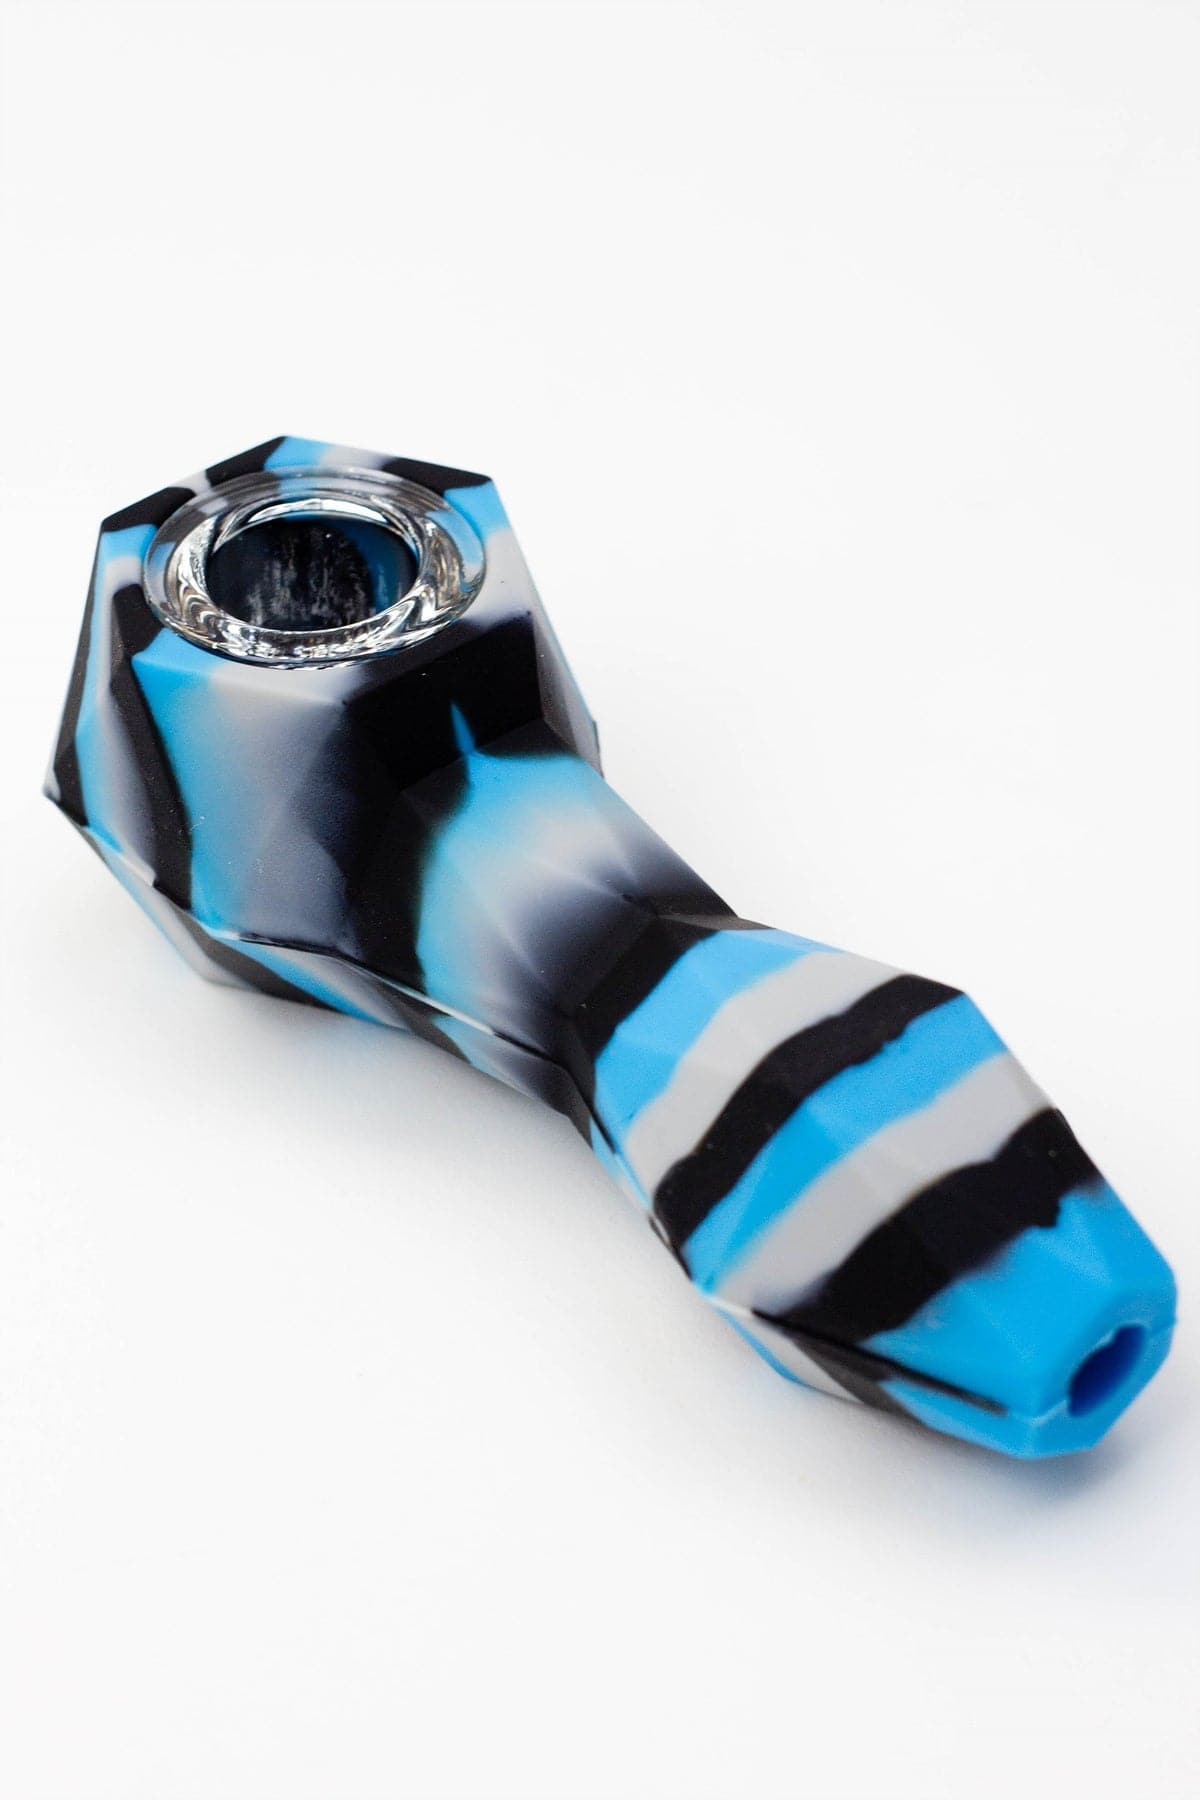 Multi colored silicone hand pipe with glass bowl_6